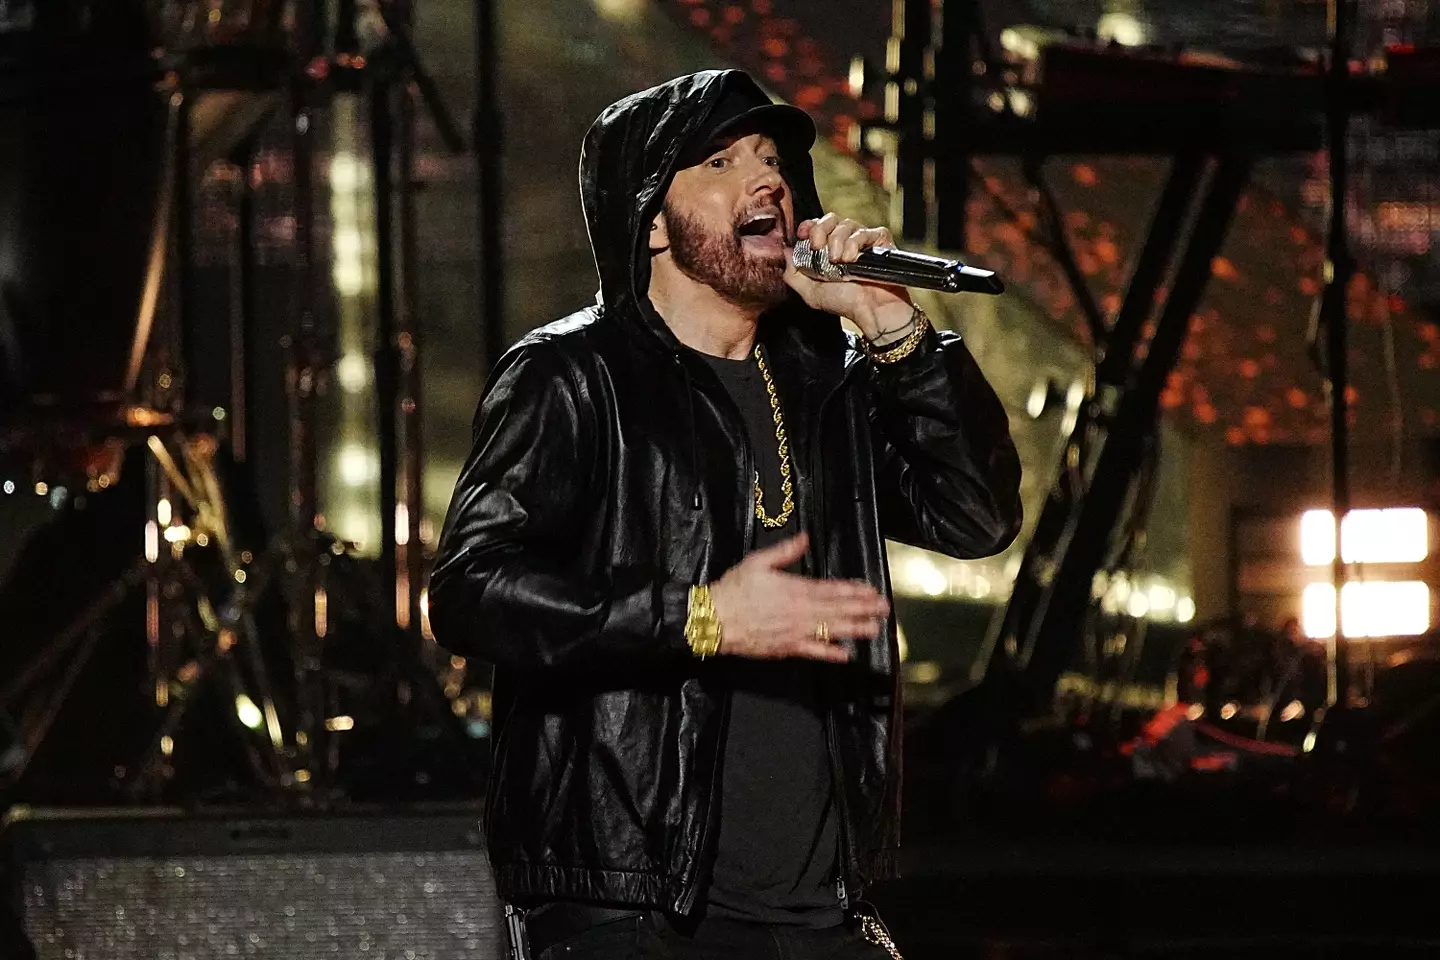 Eminem sounds very different these days to the way he did aged 16... obviously.